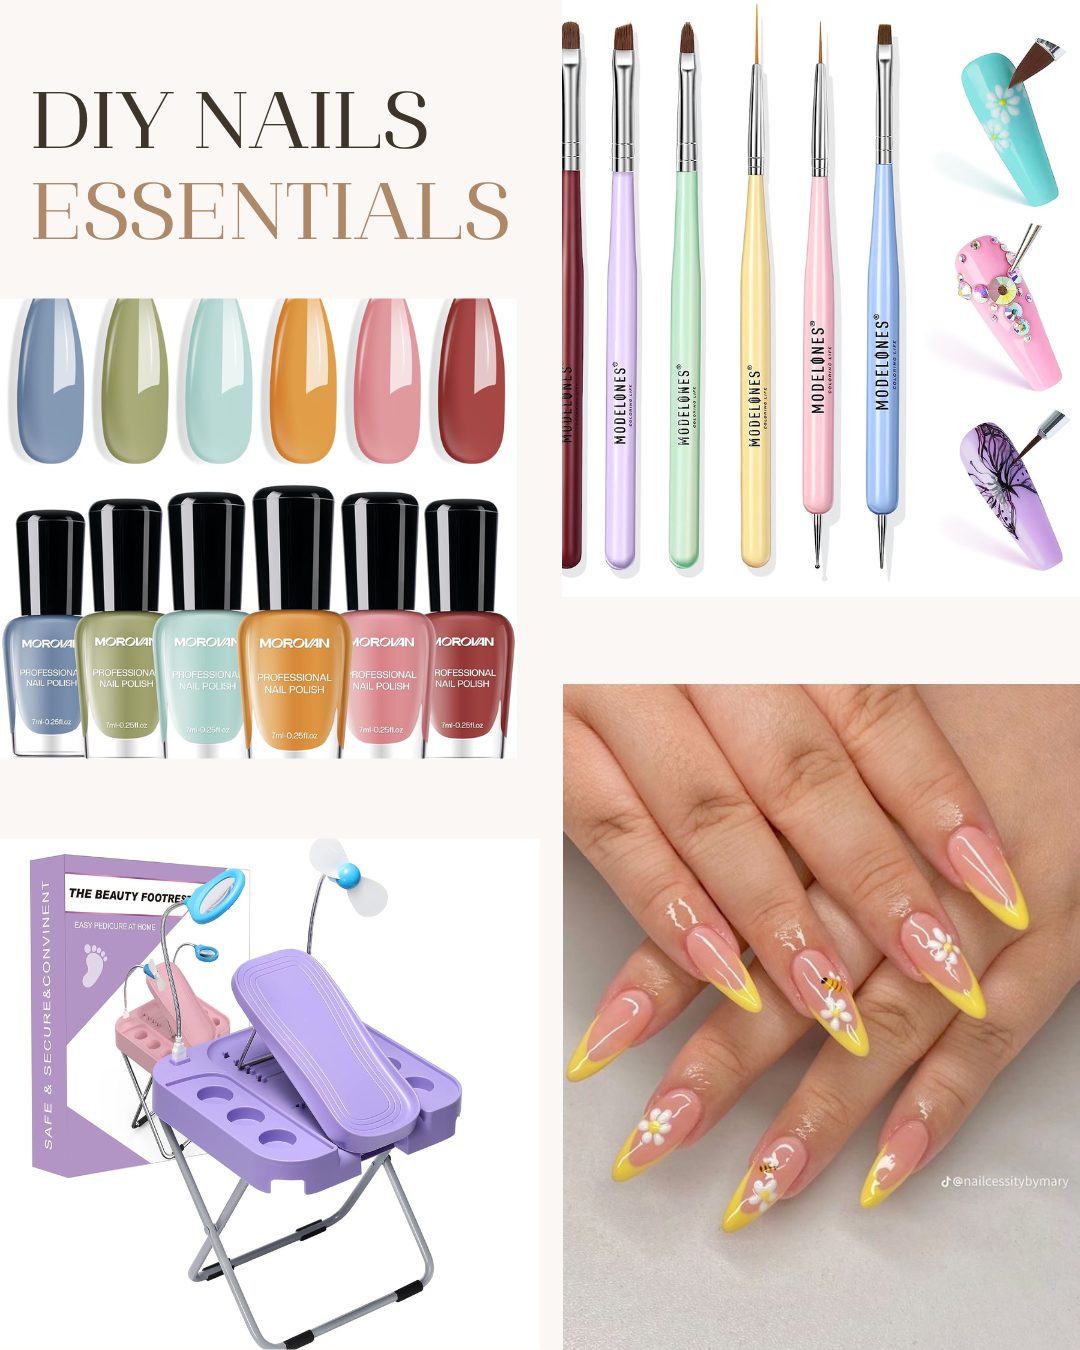 DIY Nails: Essential Supplies for at-Home Nails